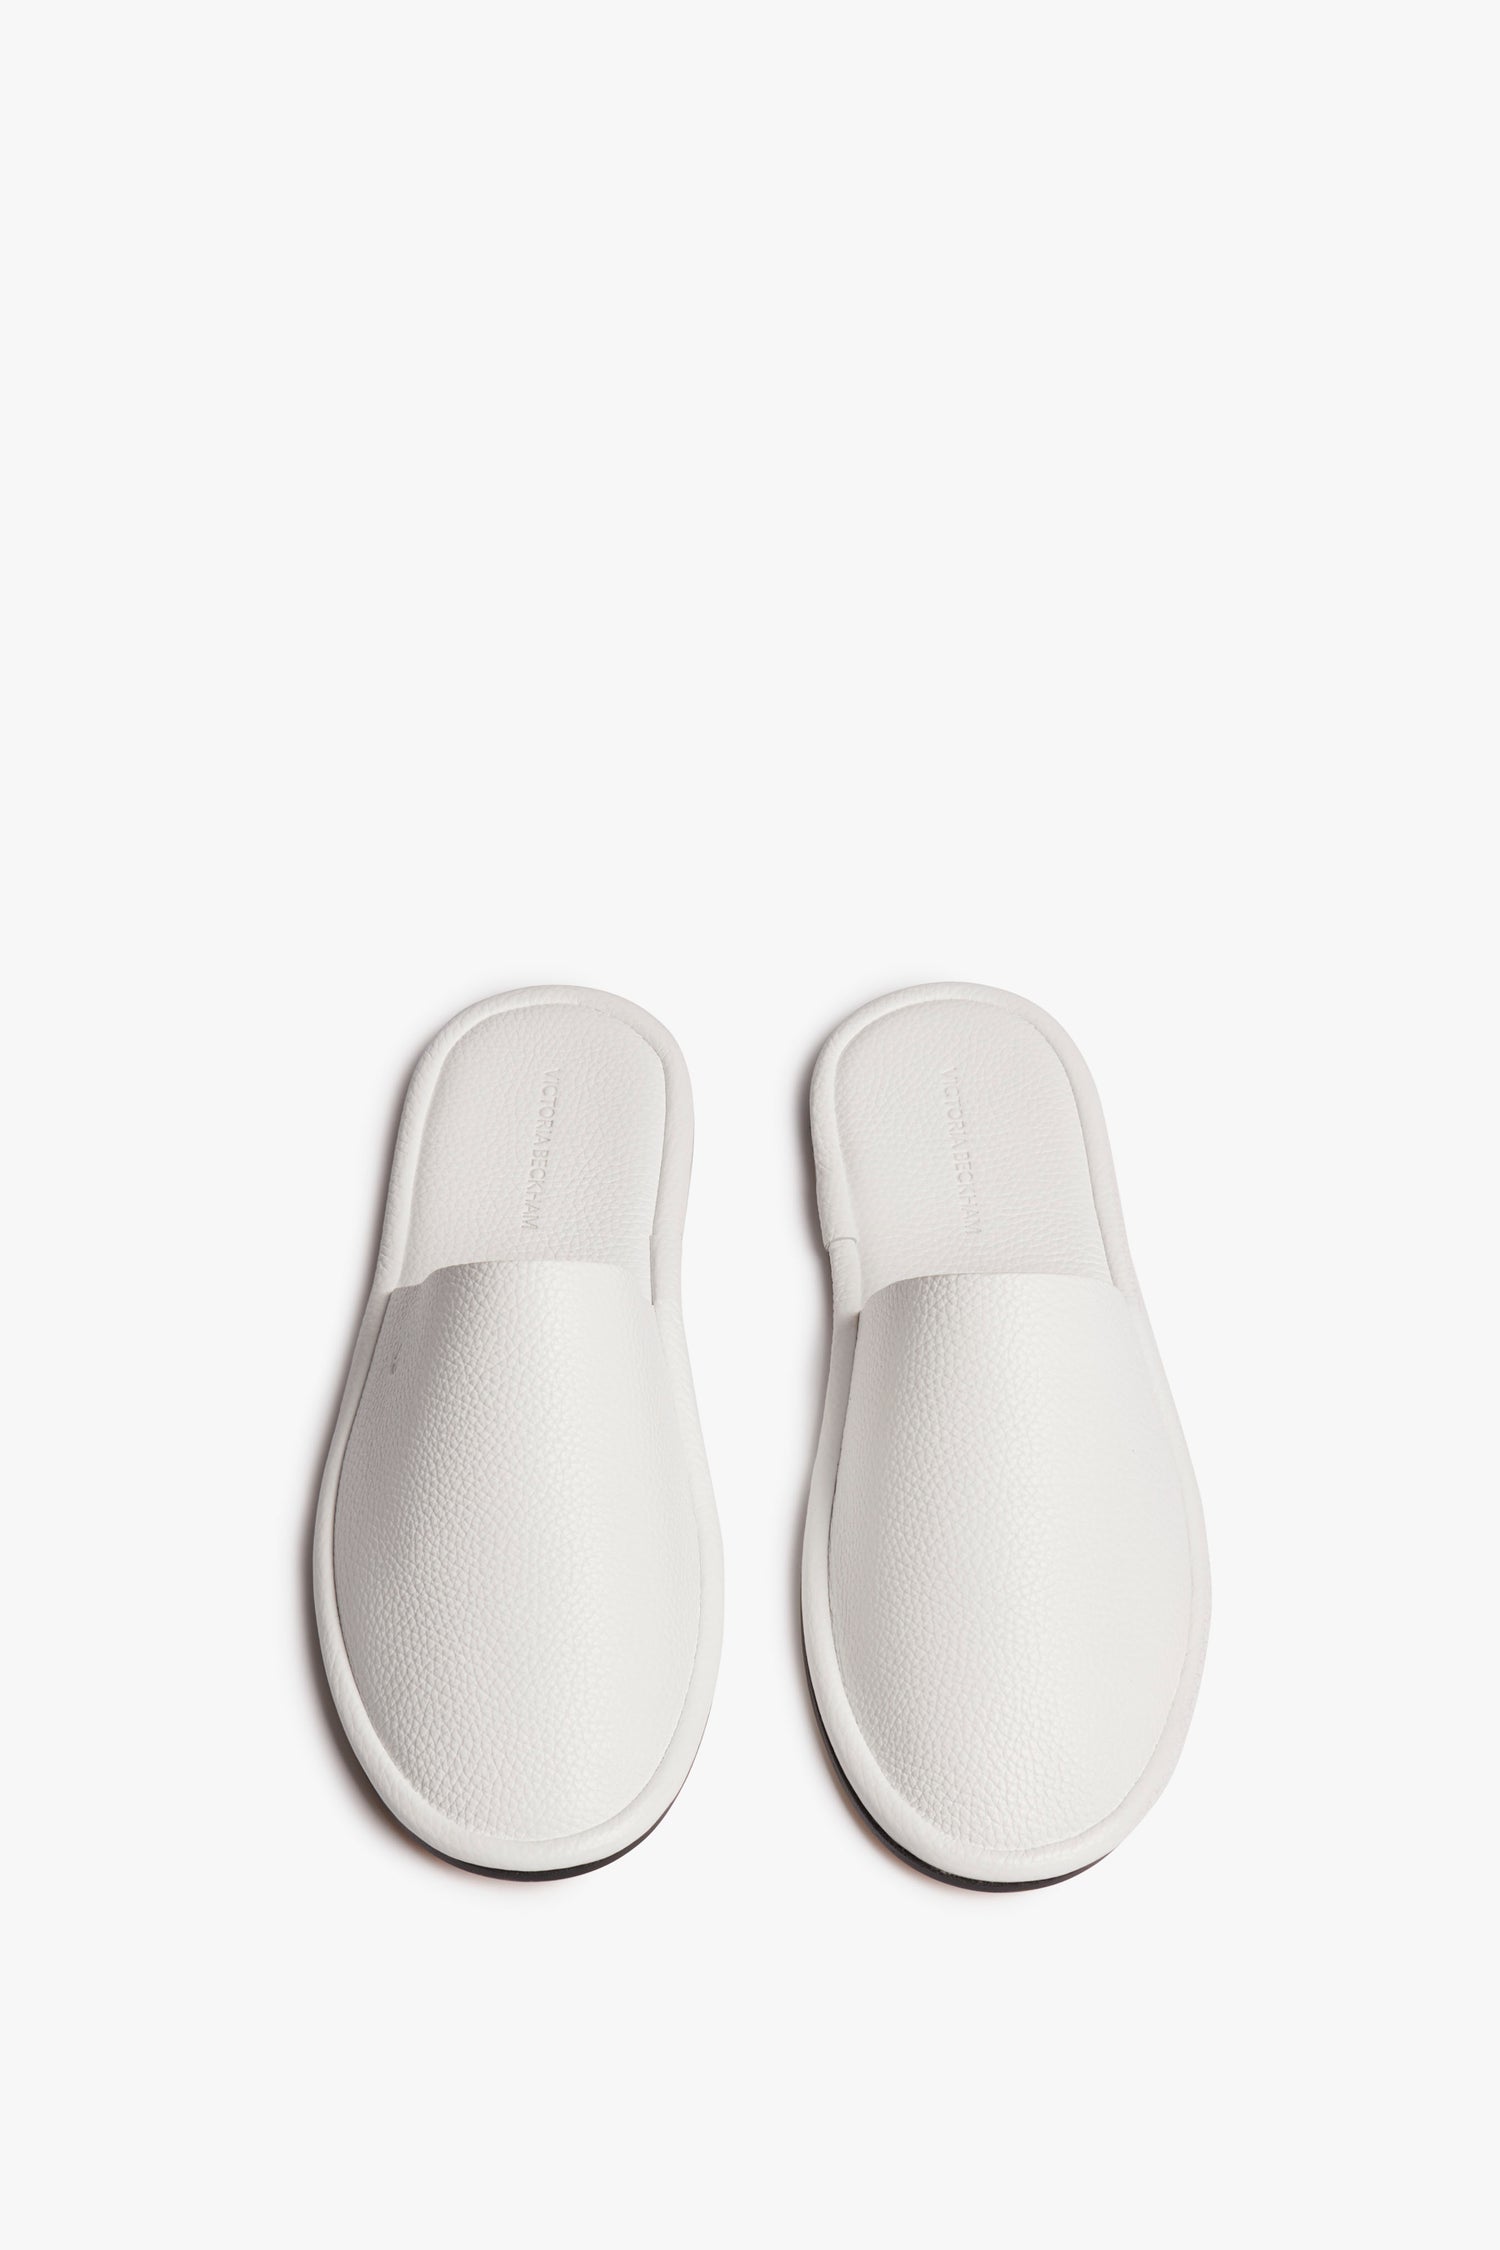 A pair of white, slip-on slippers with a textured surface are positioned side by side on a white background, embodying the chic simplicity of Victoria Beckham's Amelia Leather Mule in White design.